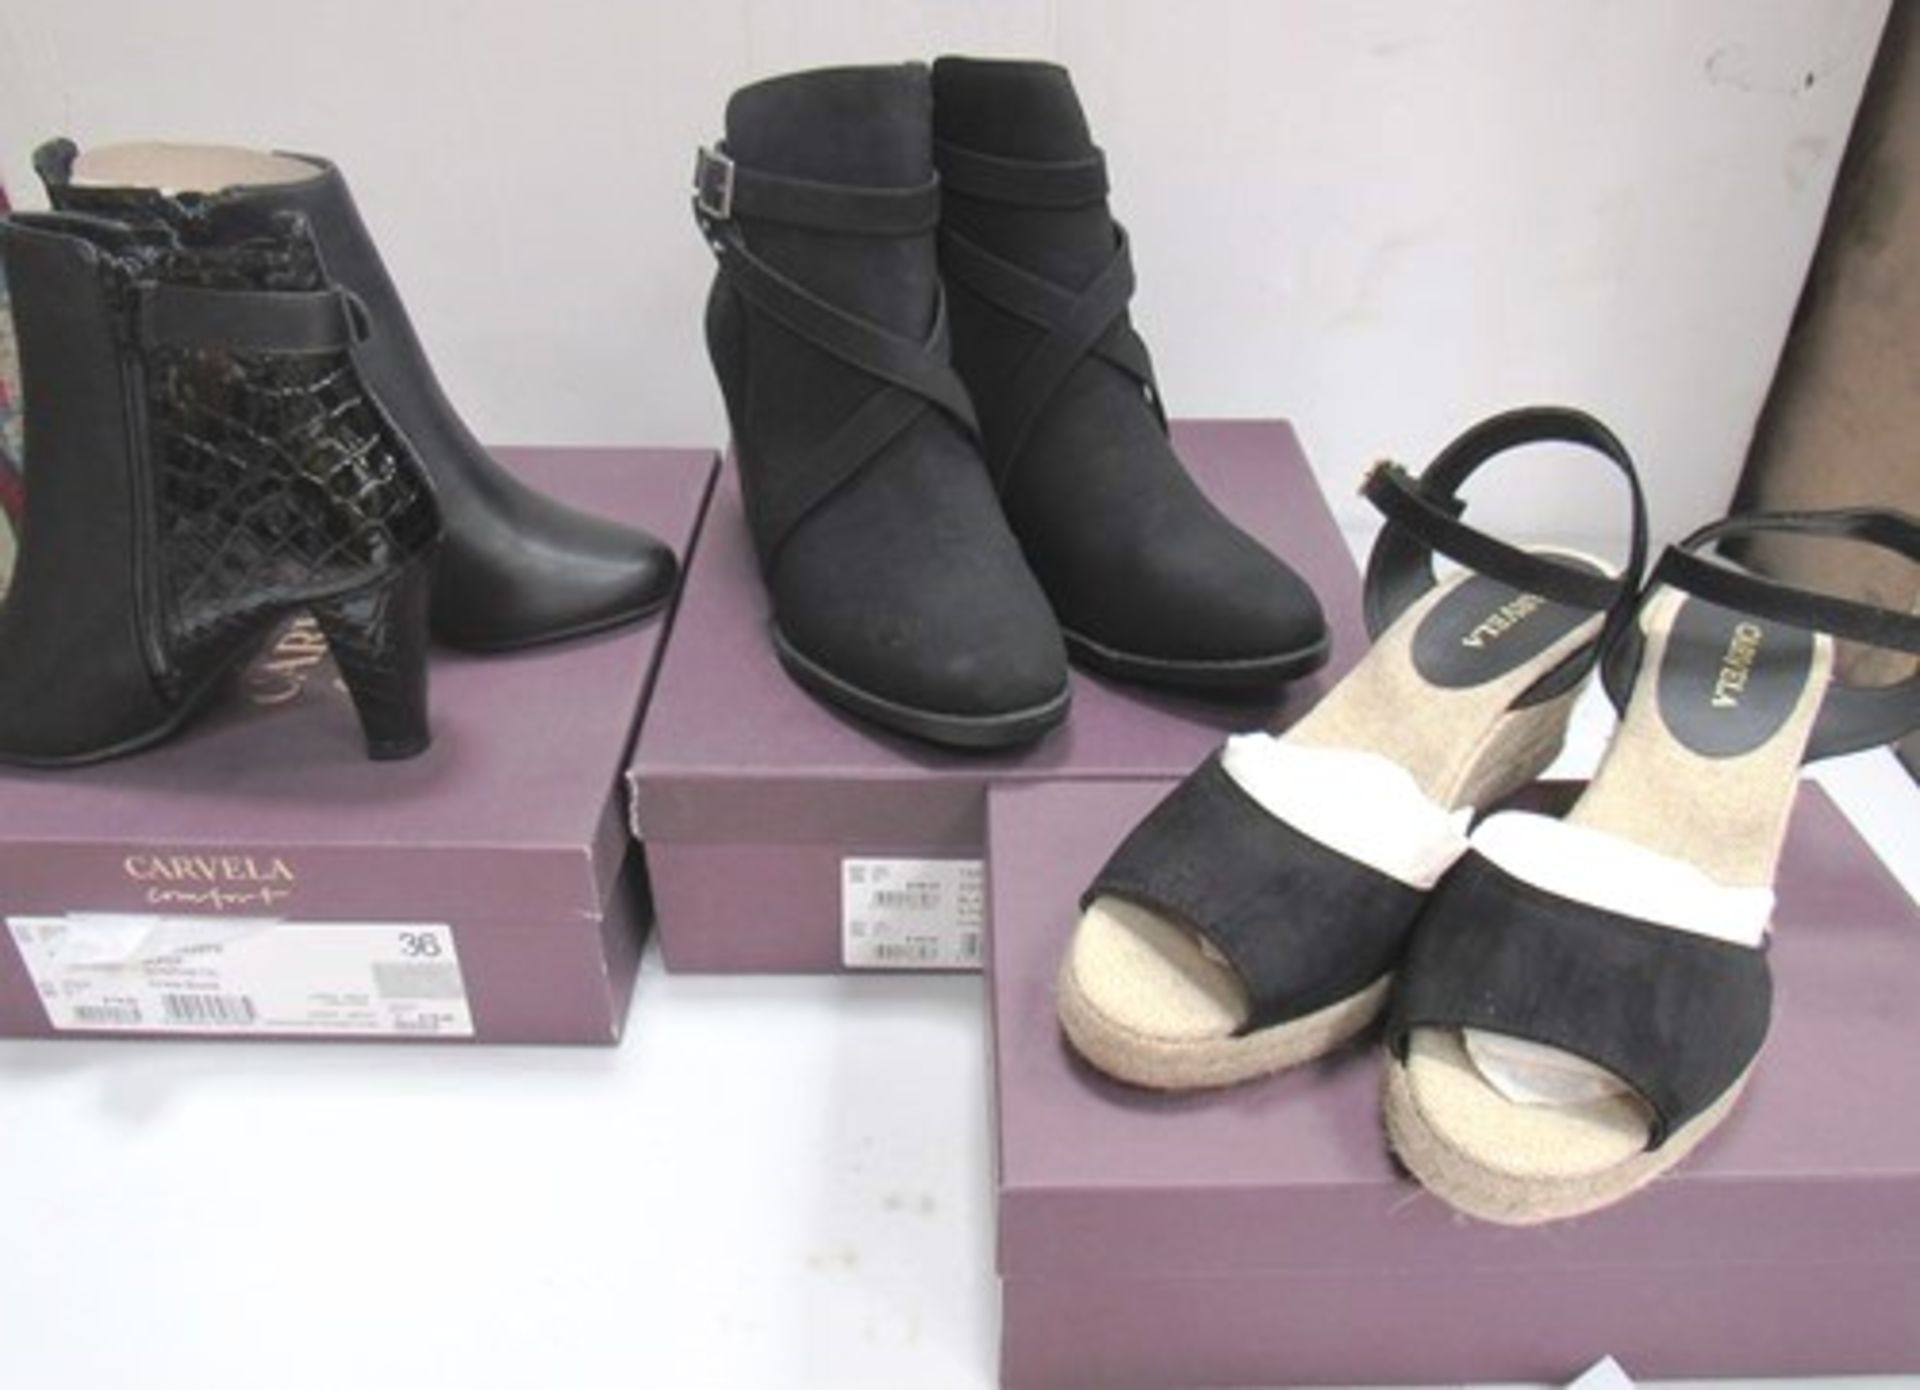 3 x pairs of Carvela ladies footwear comprising 2 x ankle boots, size EU 40 and EU36 and 1 x pair of